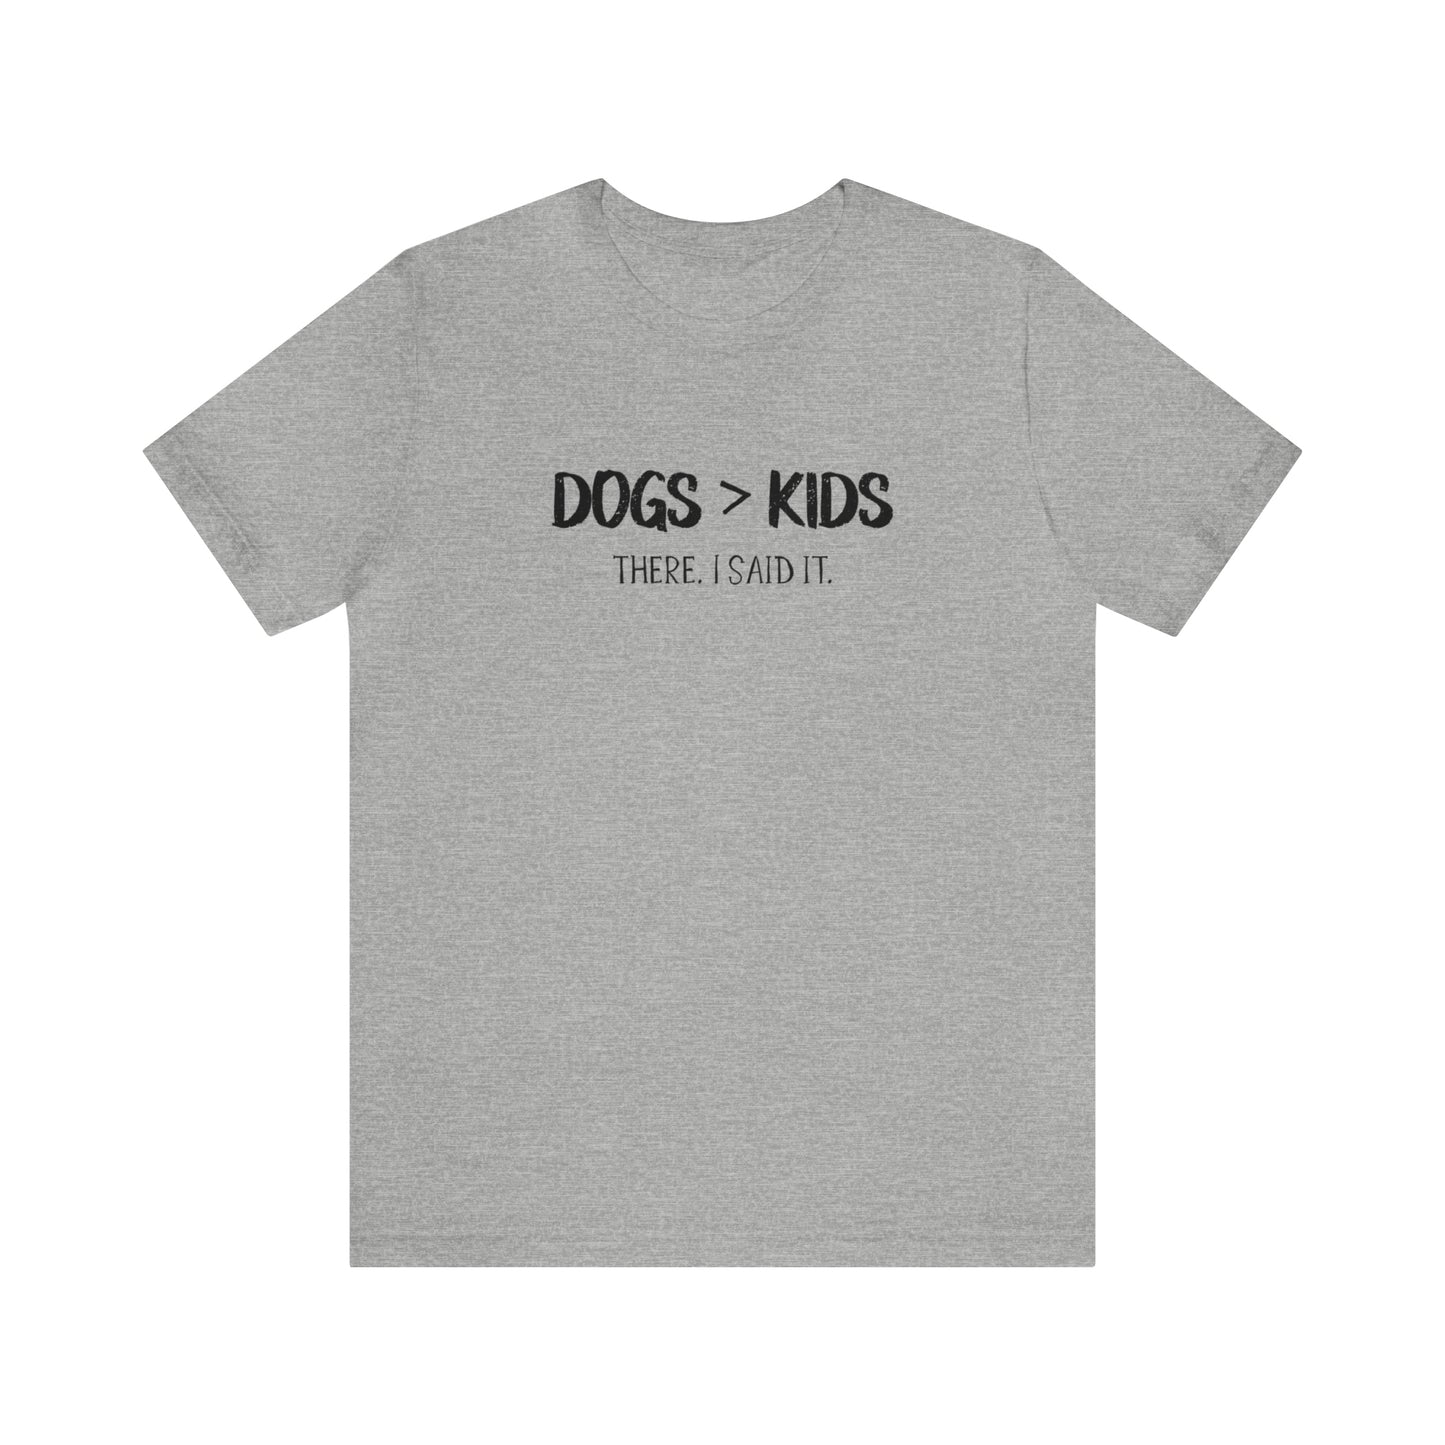 dogs are better than kids t shirt grey